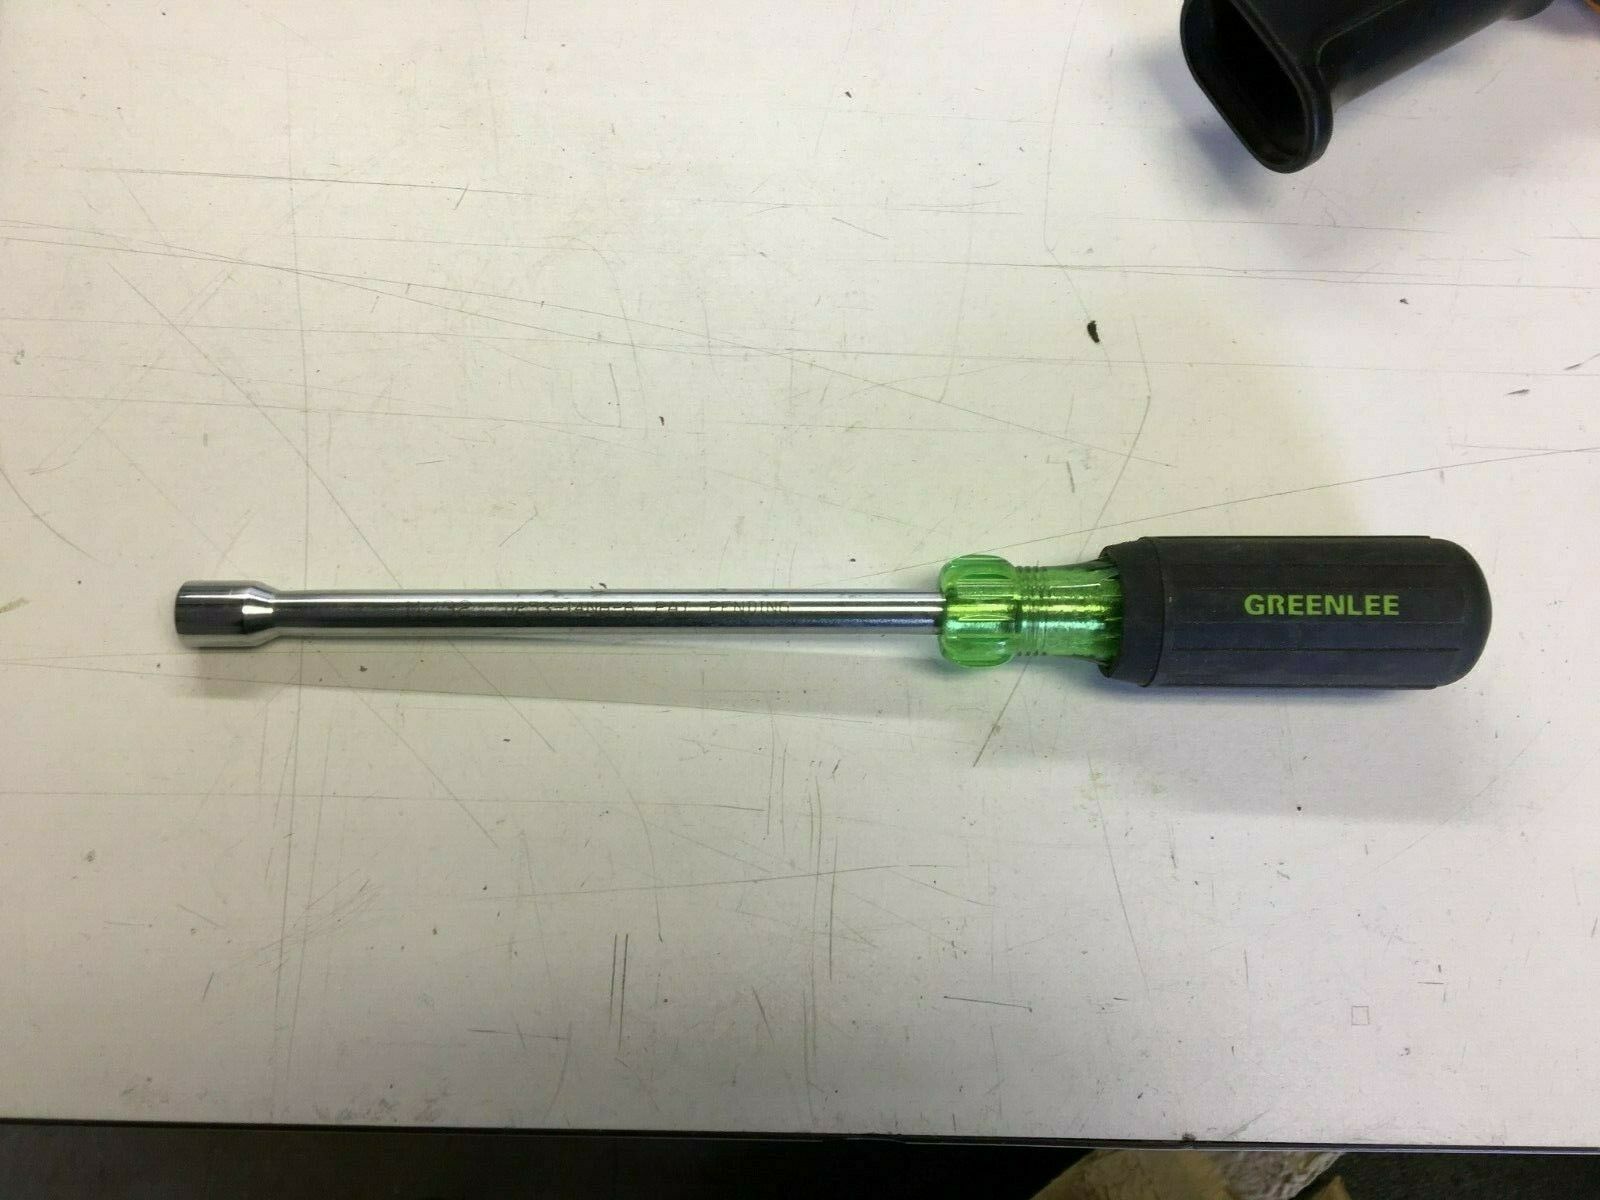 Greenlee NUT DRIVER 11/32X6" 0253-14NH-6 excellent condition - $17.82